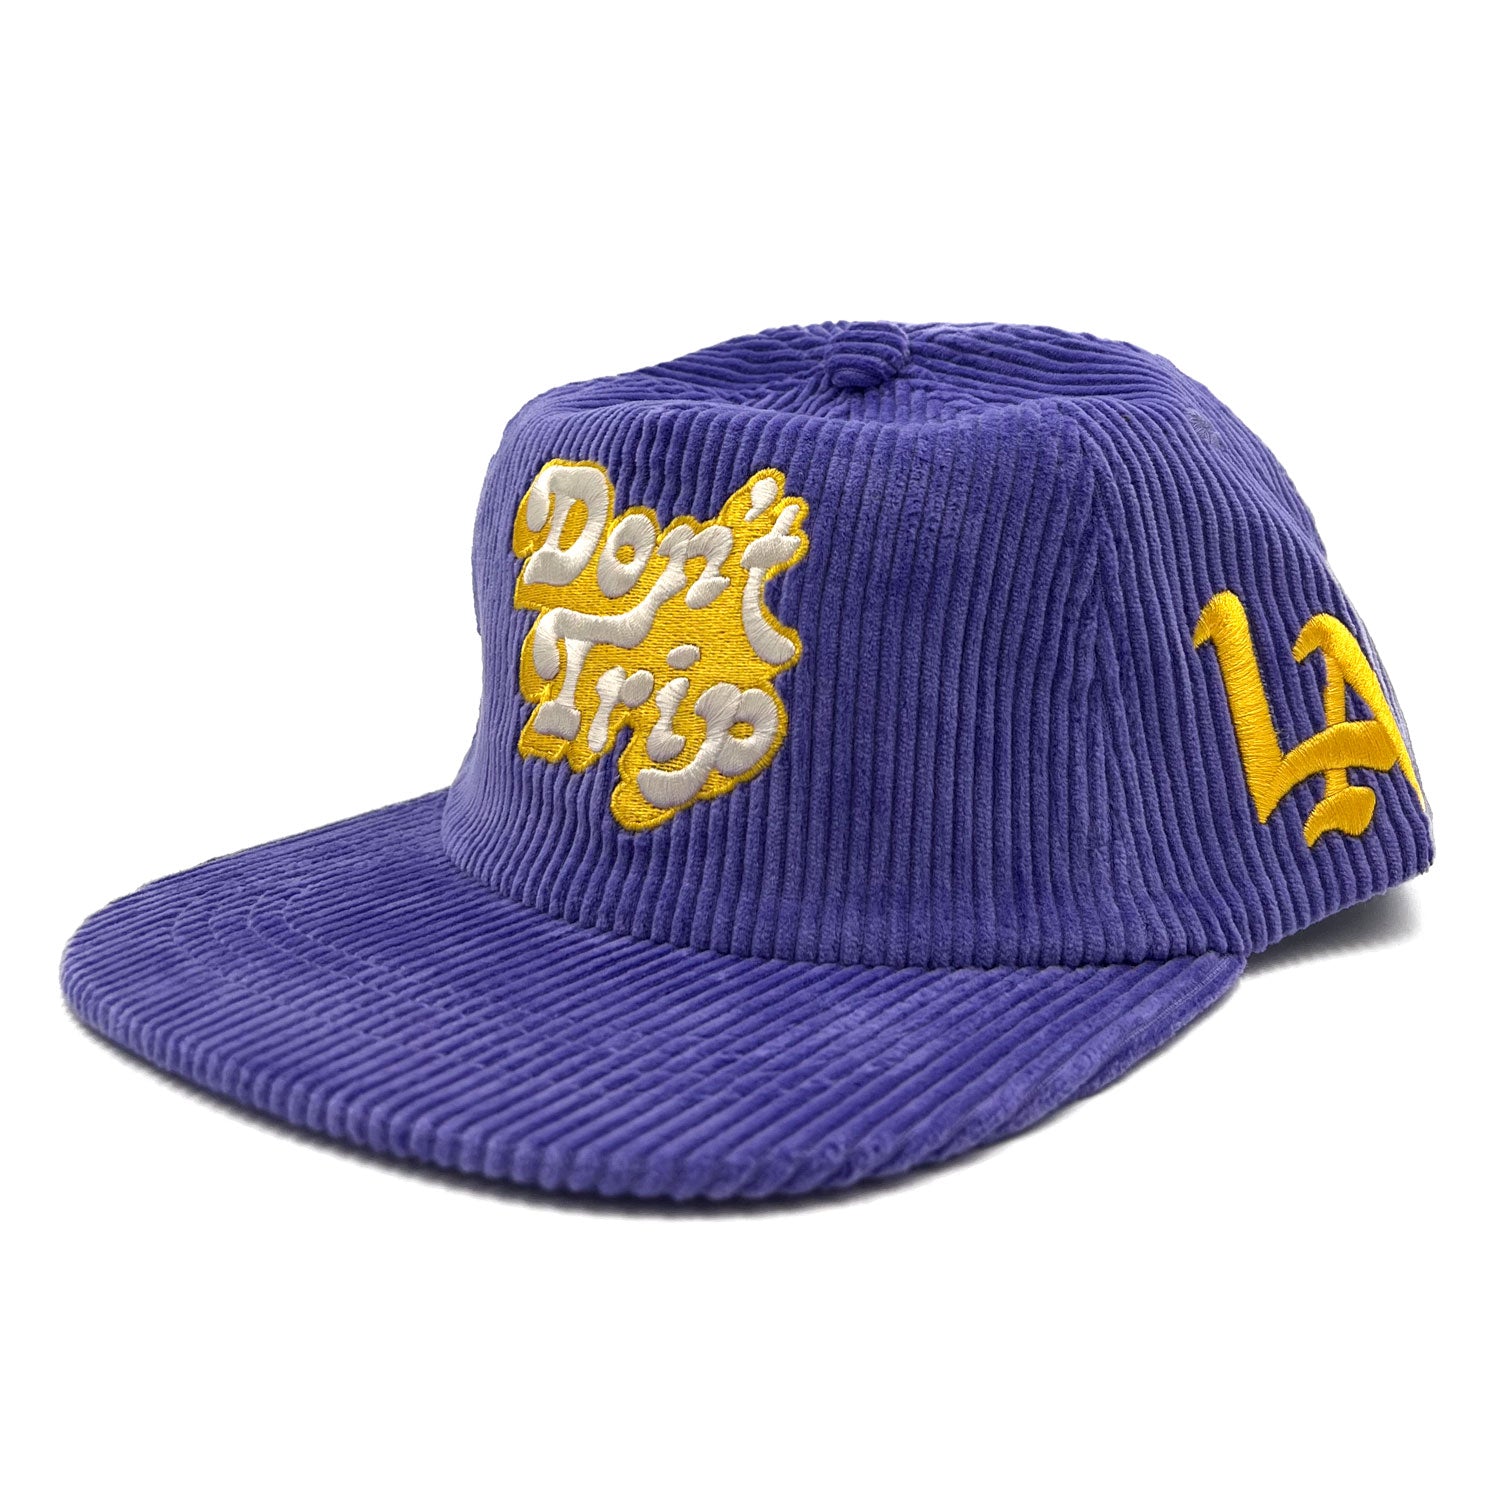 Don't Trip purple corduroy hat with white and yellow embroidered Don't Trip logo and yellow LA logo on a white background, front - Free & Easy